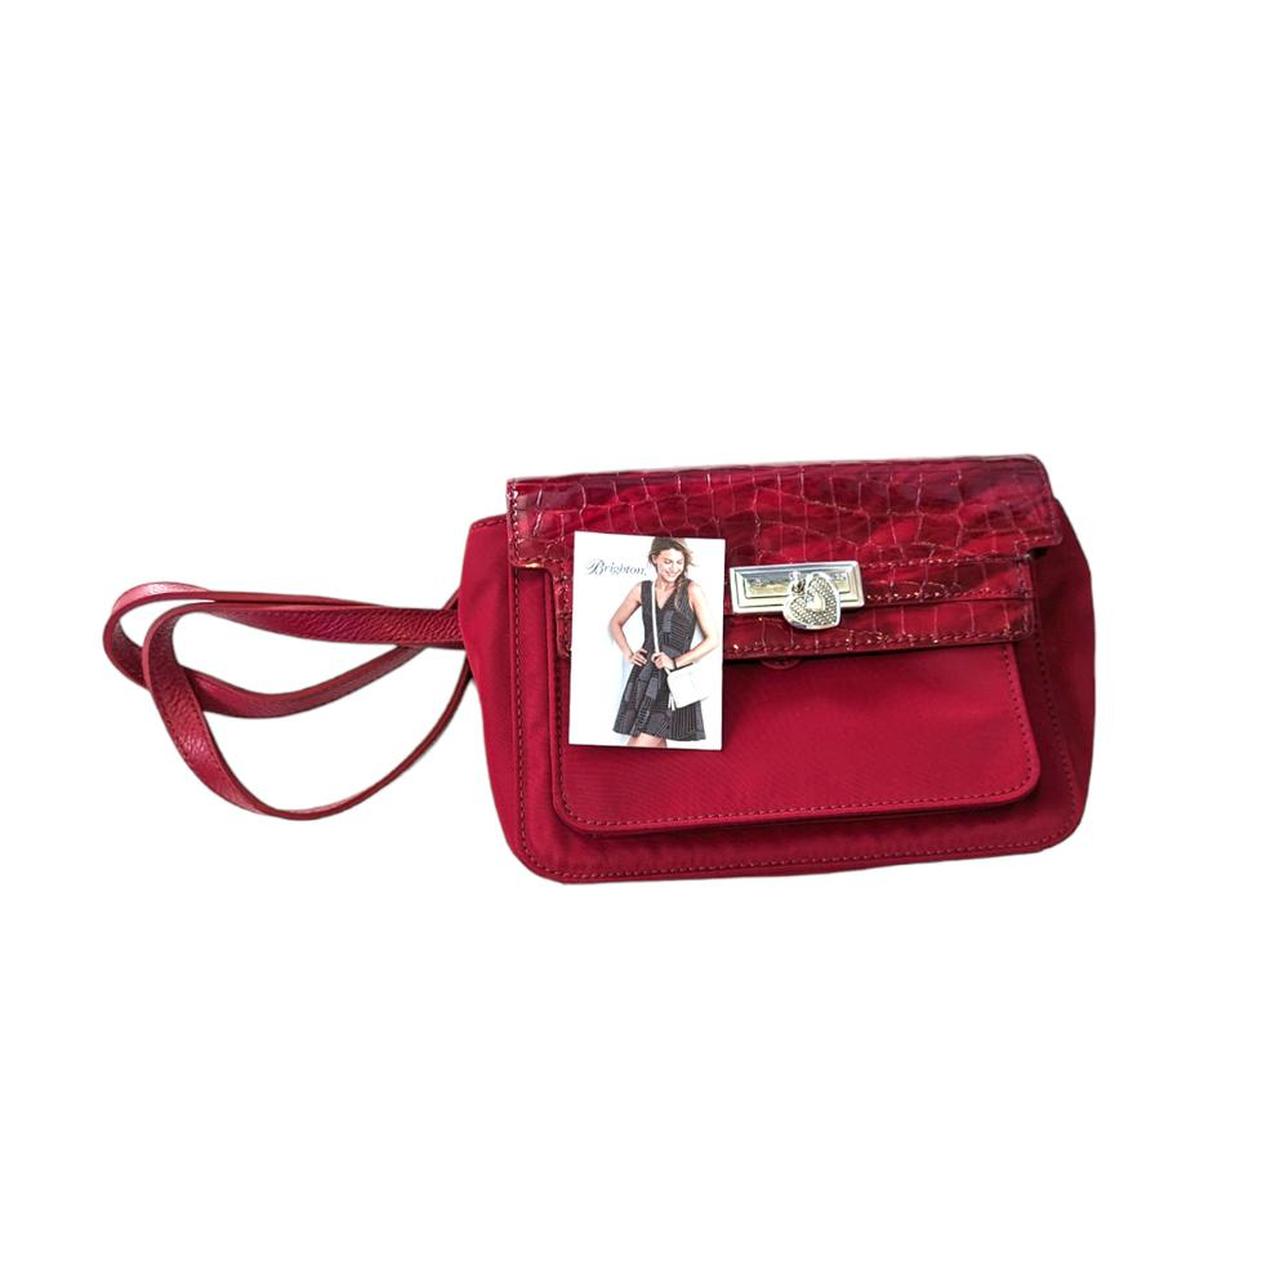 SOLD! Red Leather Handbag by Brighton